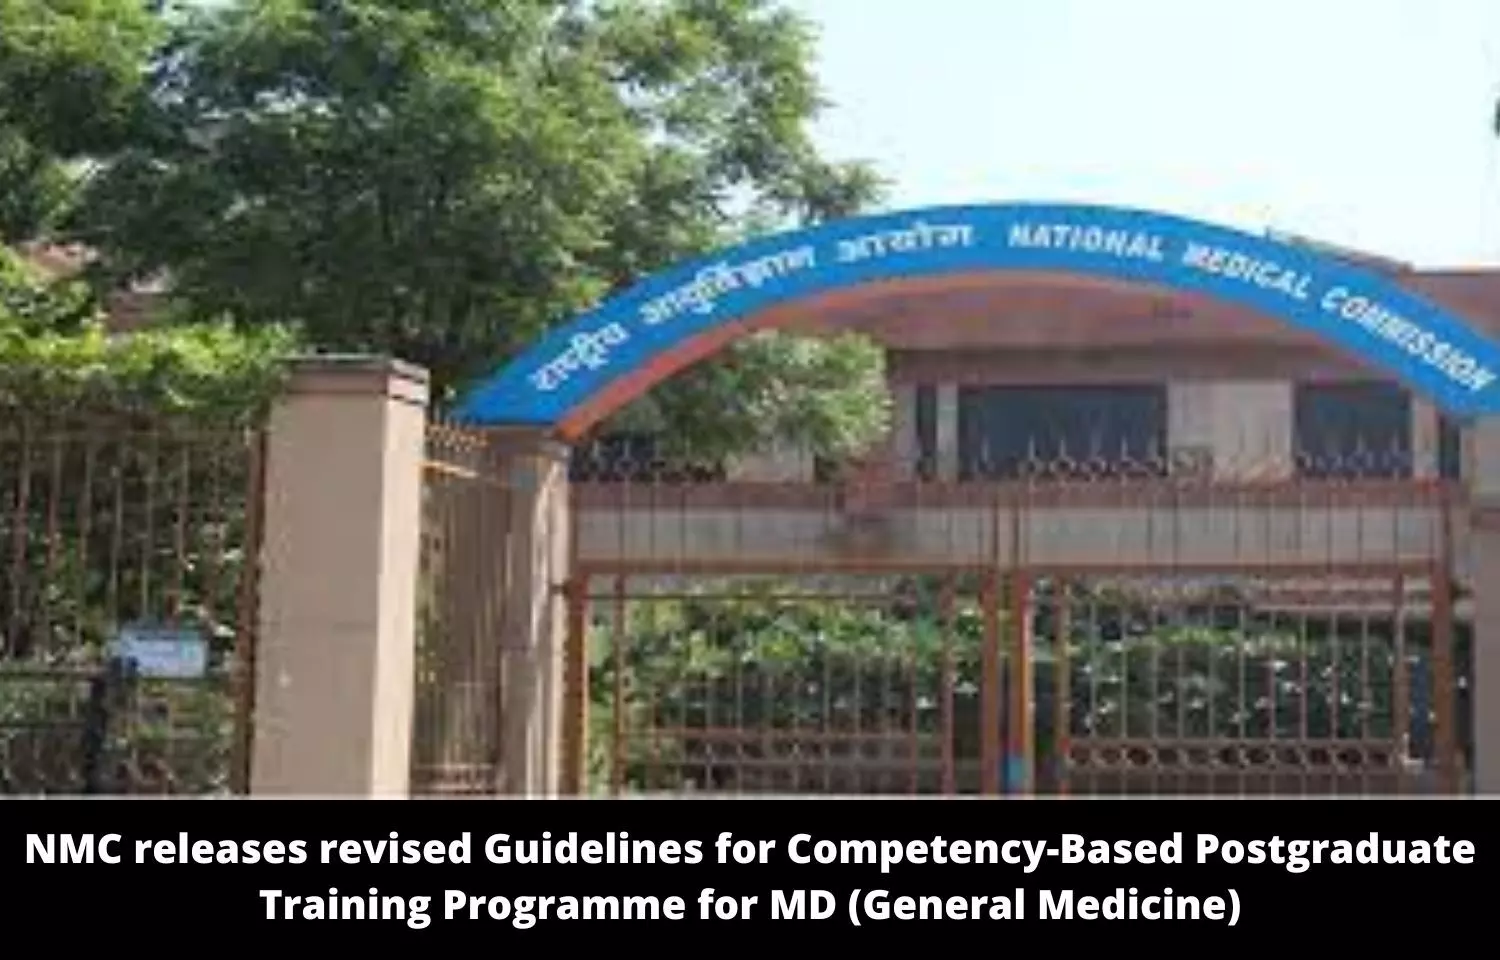 NMC releases revised Guidelines for Competency-Based Postgraduate Training Programme for MD (General Medicine)